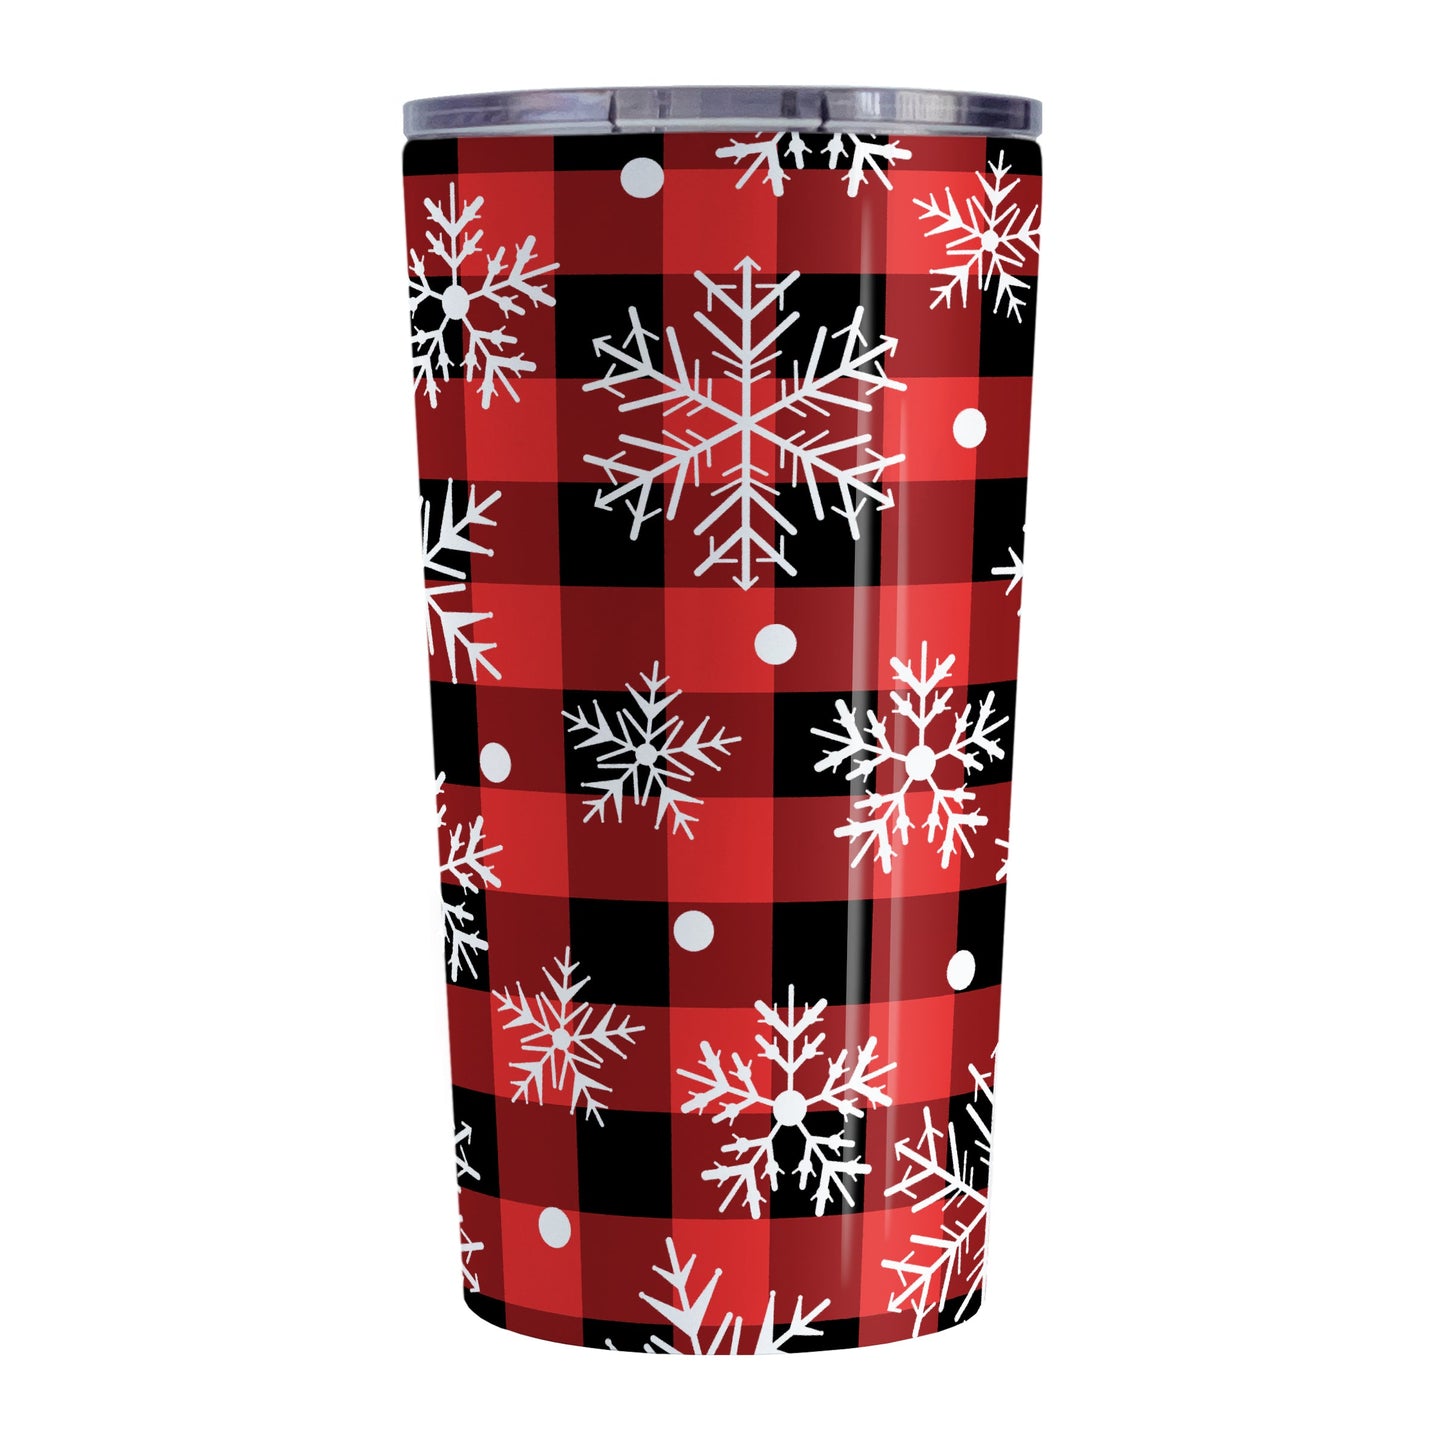 Red and Black Buffalo Plaid Snowflake Tumbler Cup (20oz) at Amy's Coffee Mugs. A stainless steel insulated tumbler cup designed with a pattern of white snowflakes over a red and black buffalo plaid pattern that wraps around the cup.